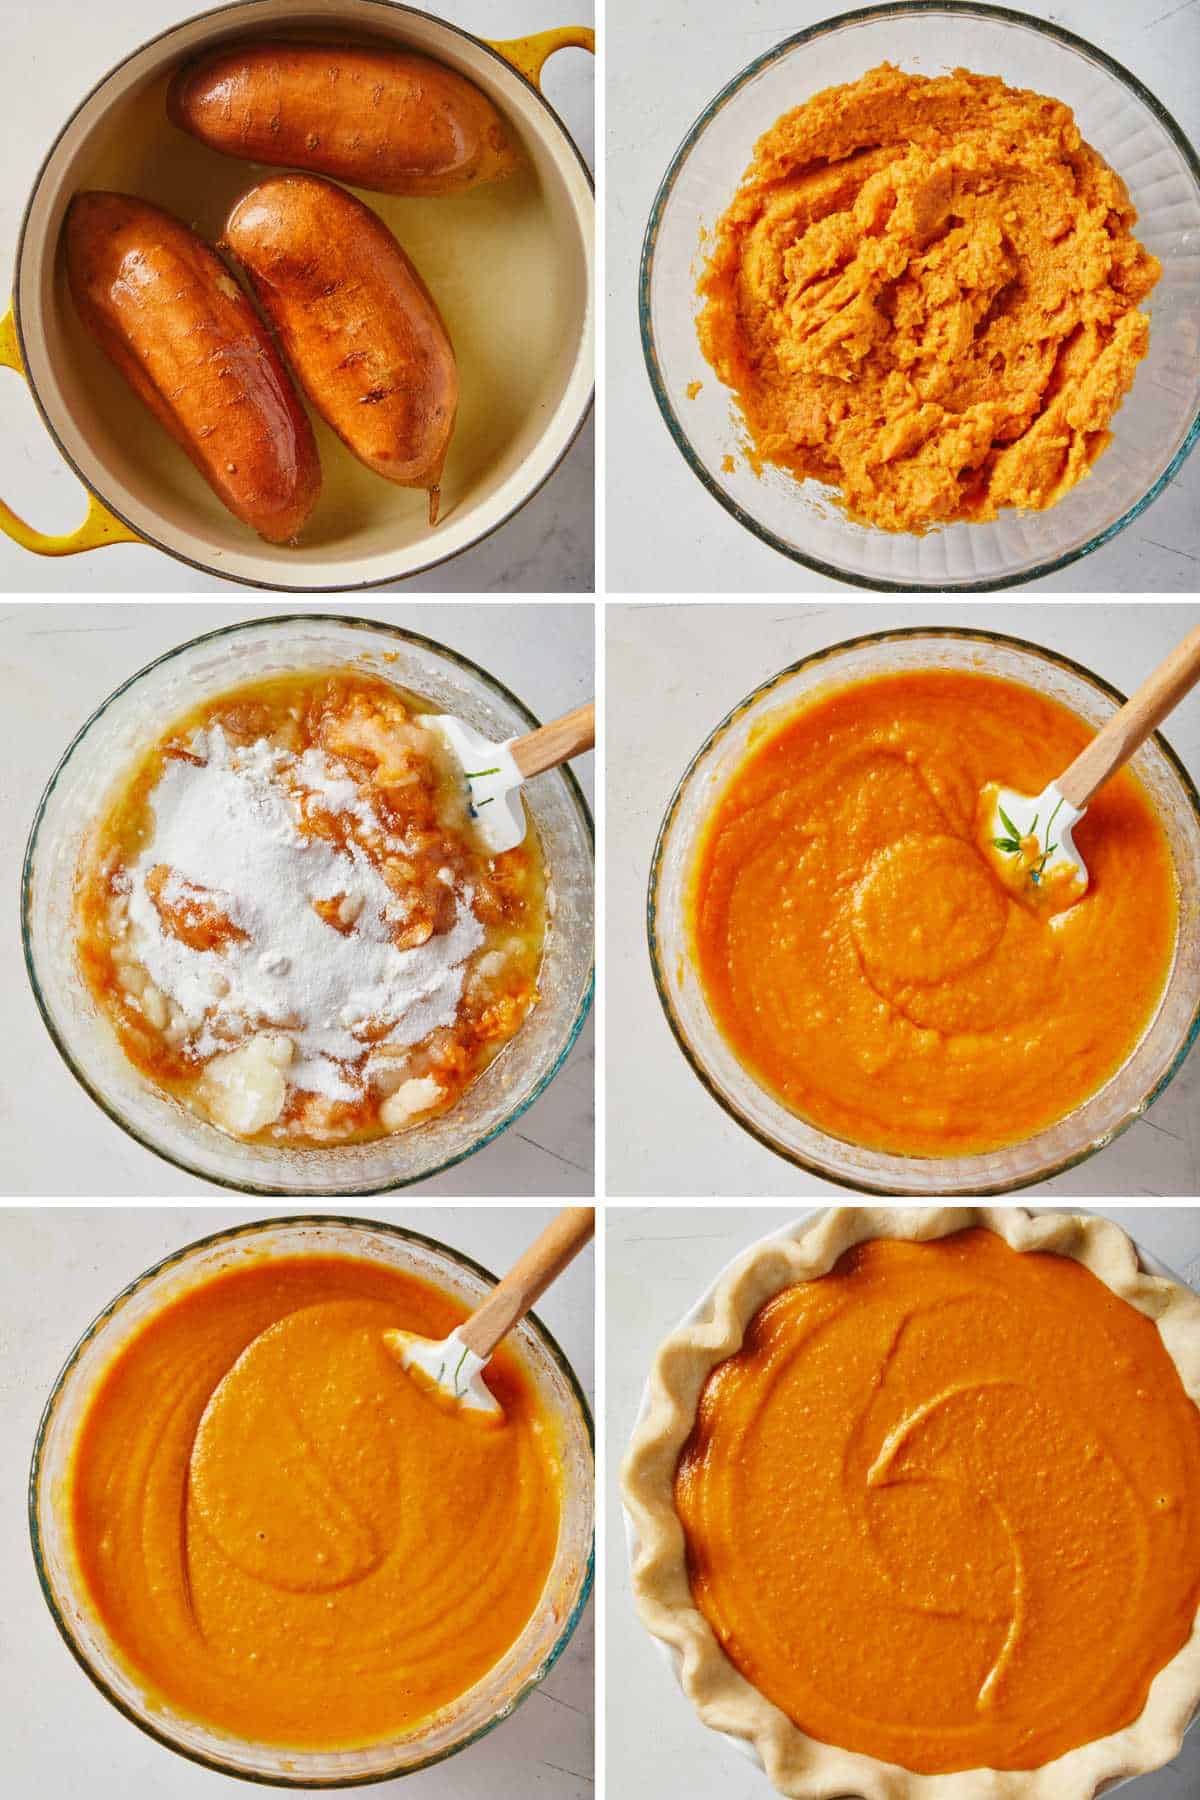 Collage of images showing cooking the sweet potatoes and peeling them.